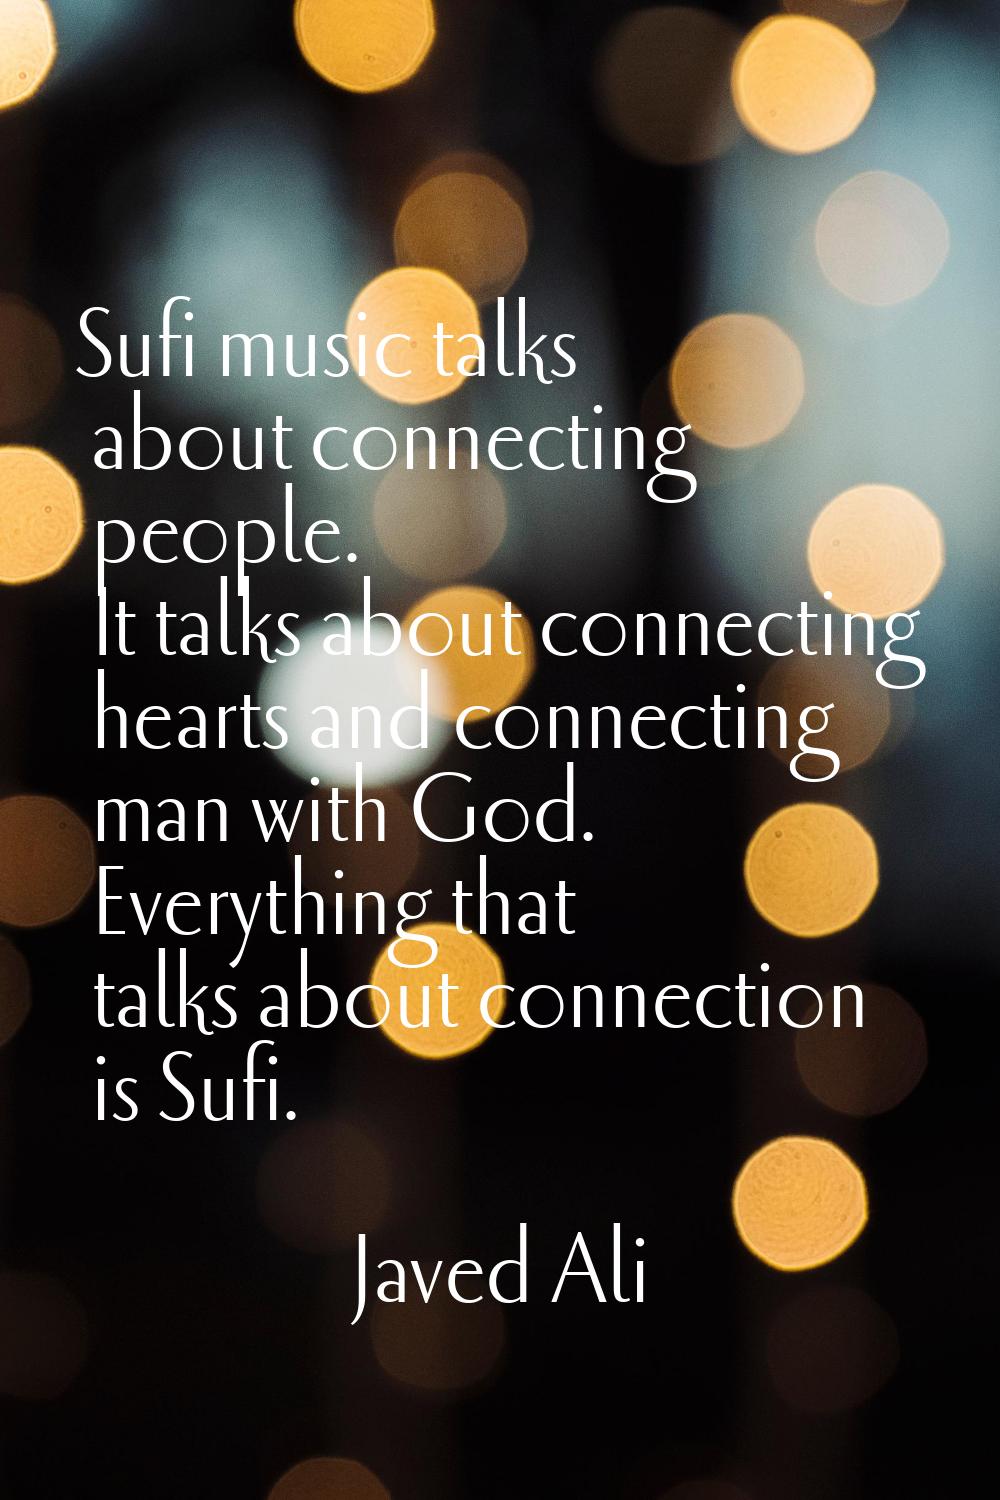 Sufi music talks about connecting people. It talks about connecting hearts and connecting man with 